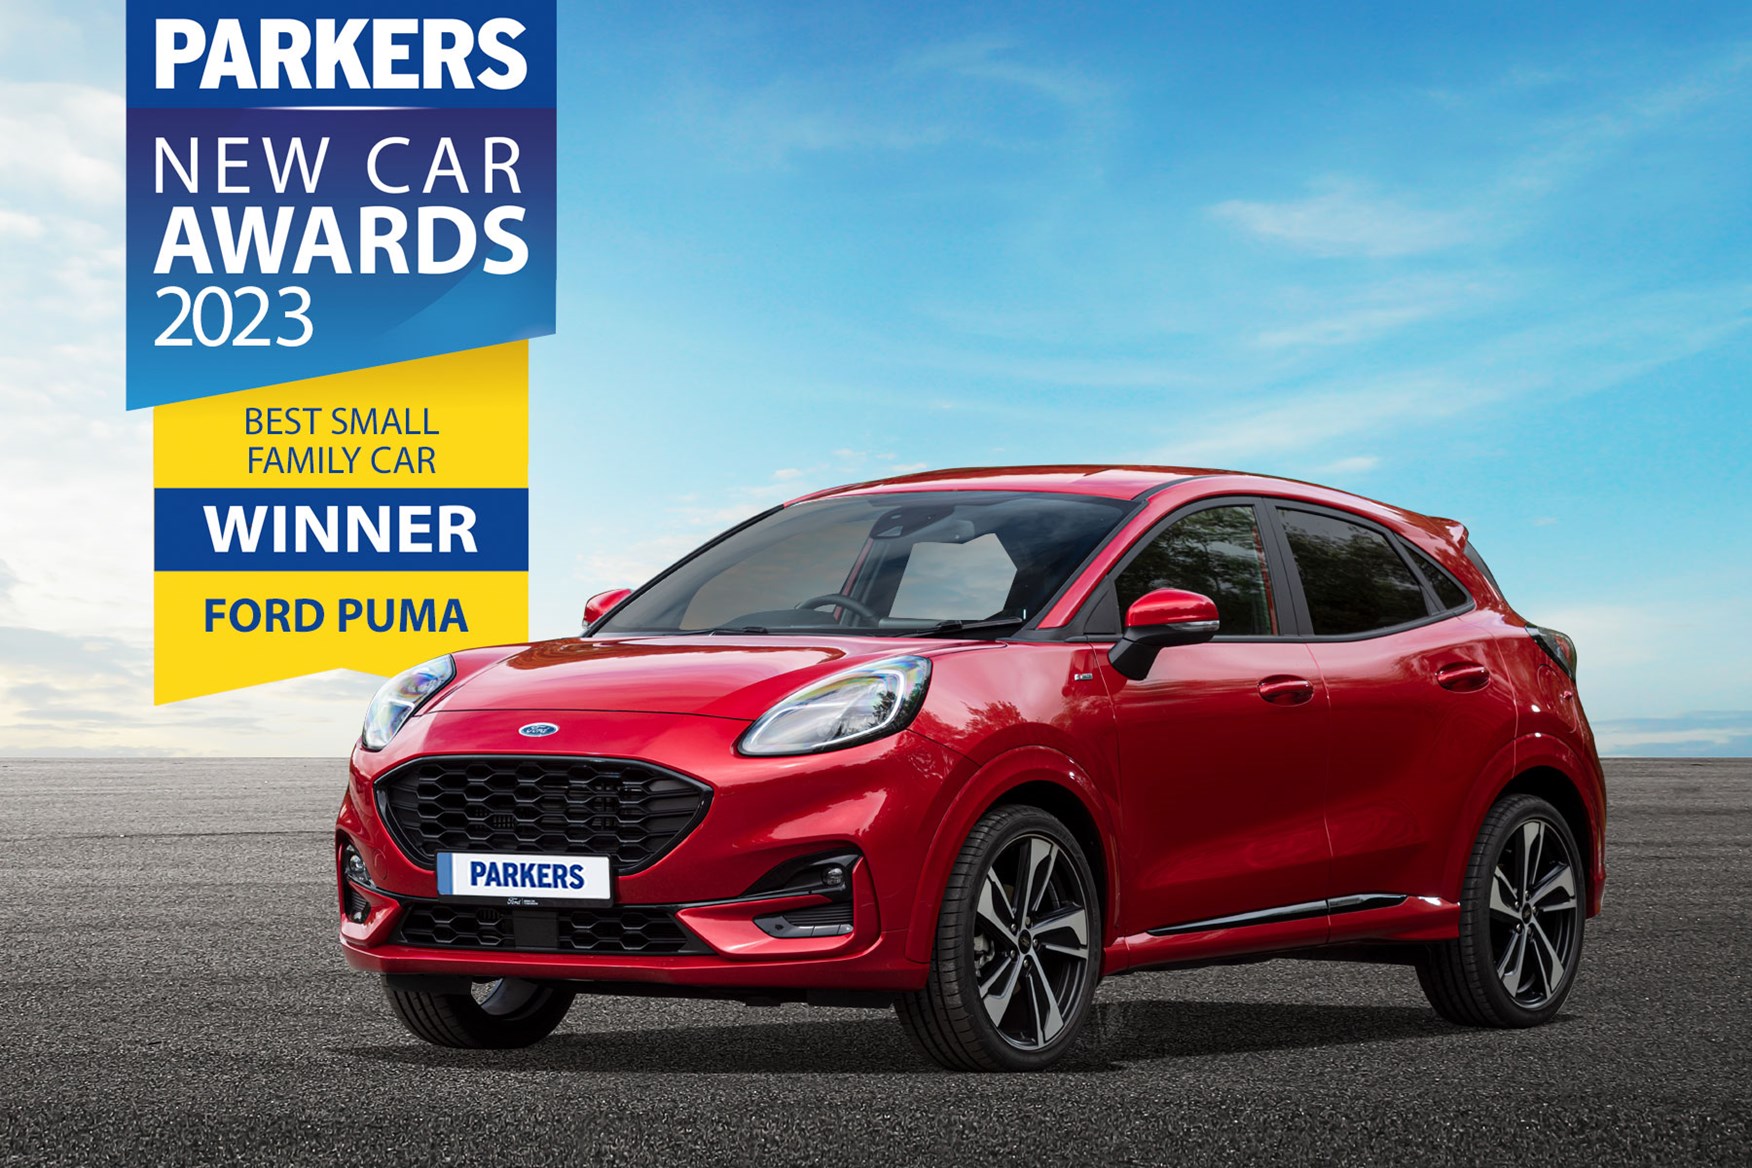 Small Family Car Winner Parkers Car Awards 2023 Parkers